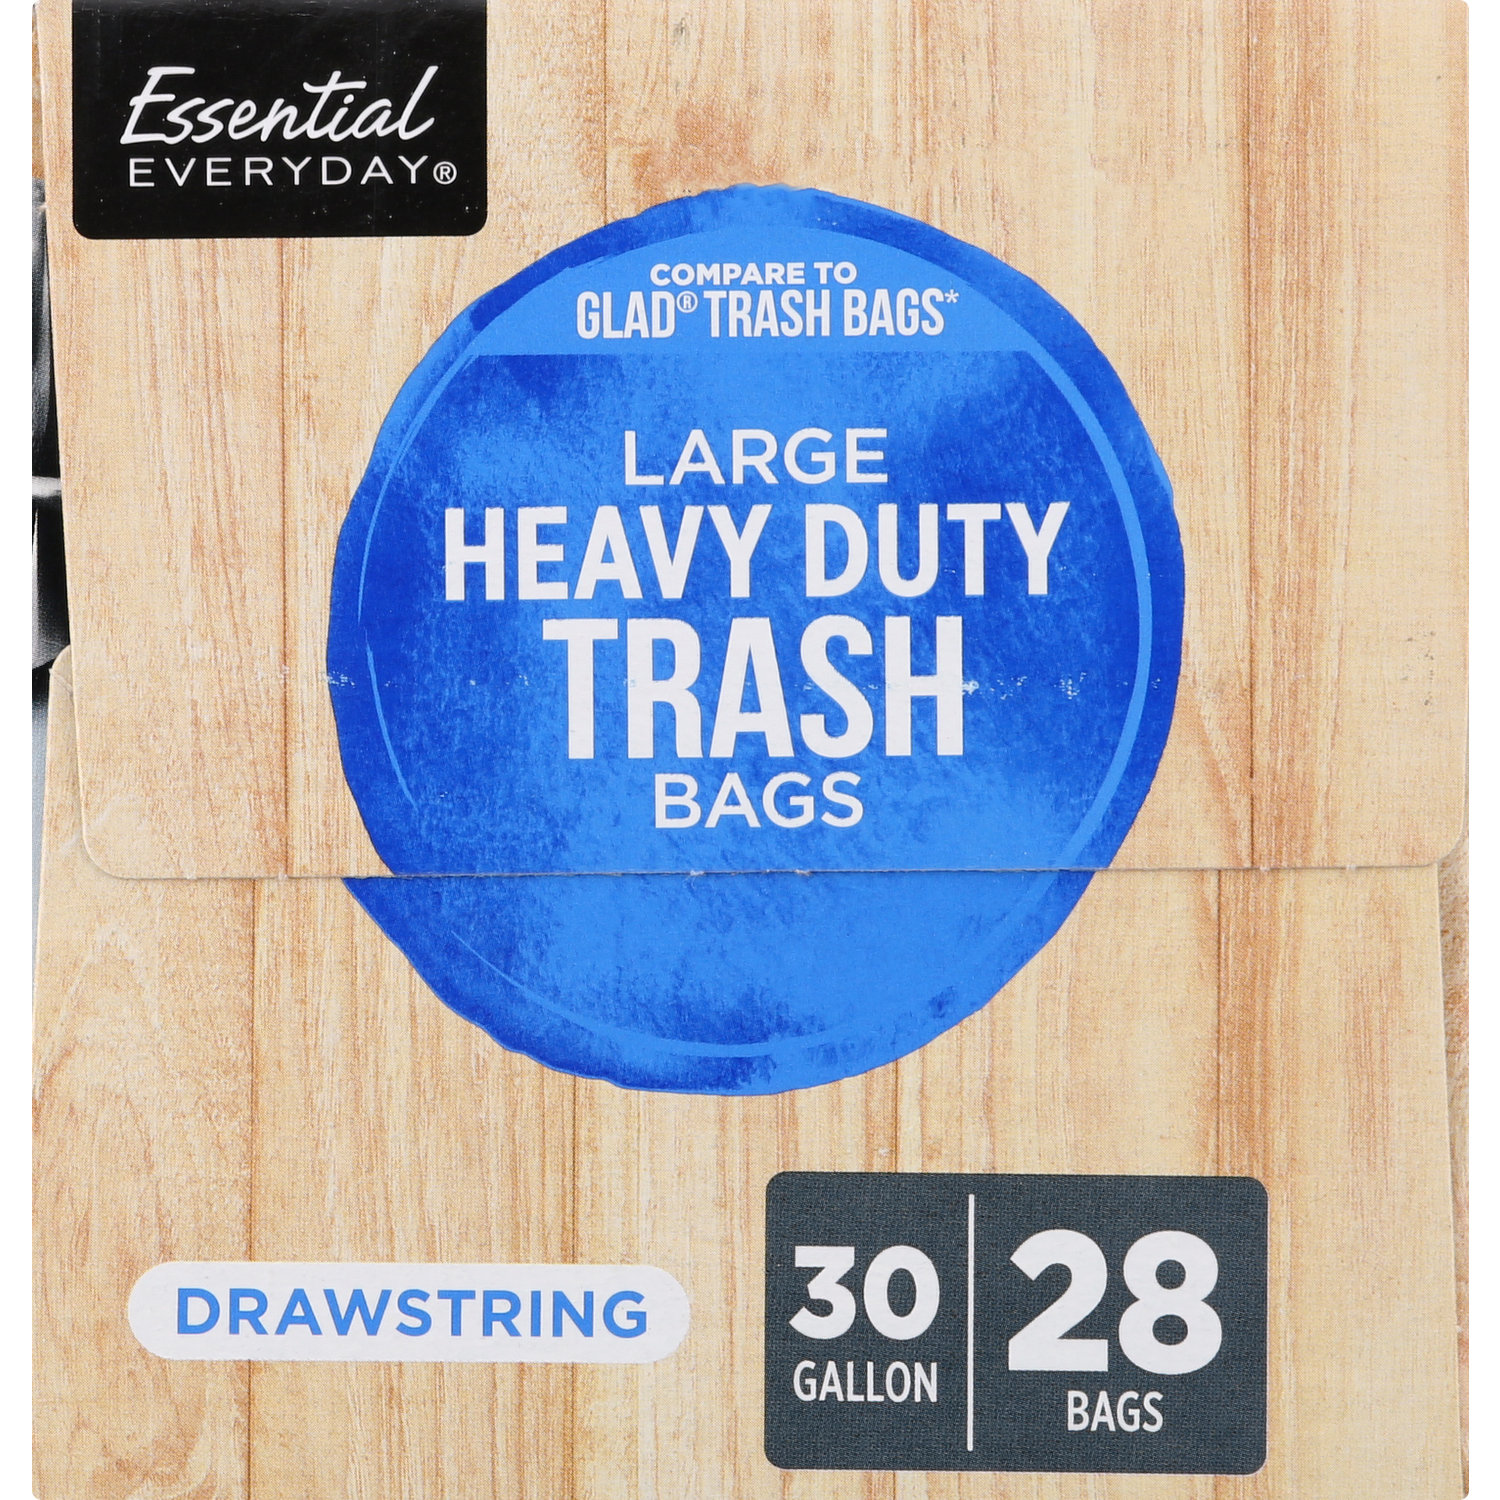 30 Gal Heavy Duty Trash Bags - 10 ct by Essential EVERYDAY at